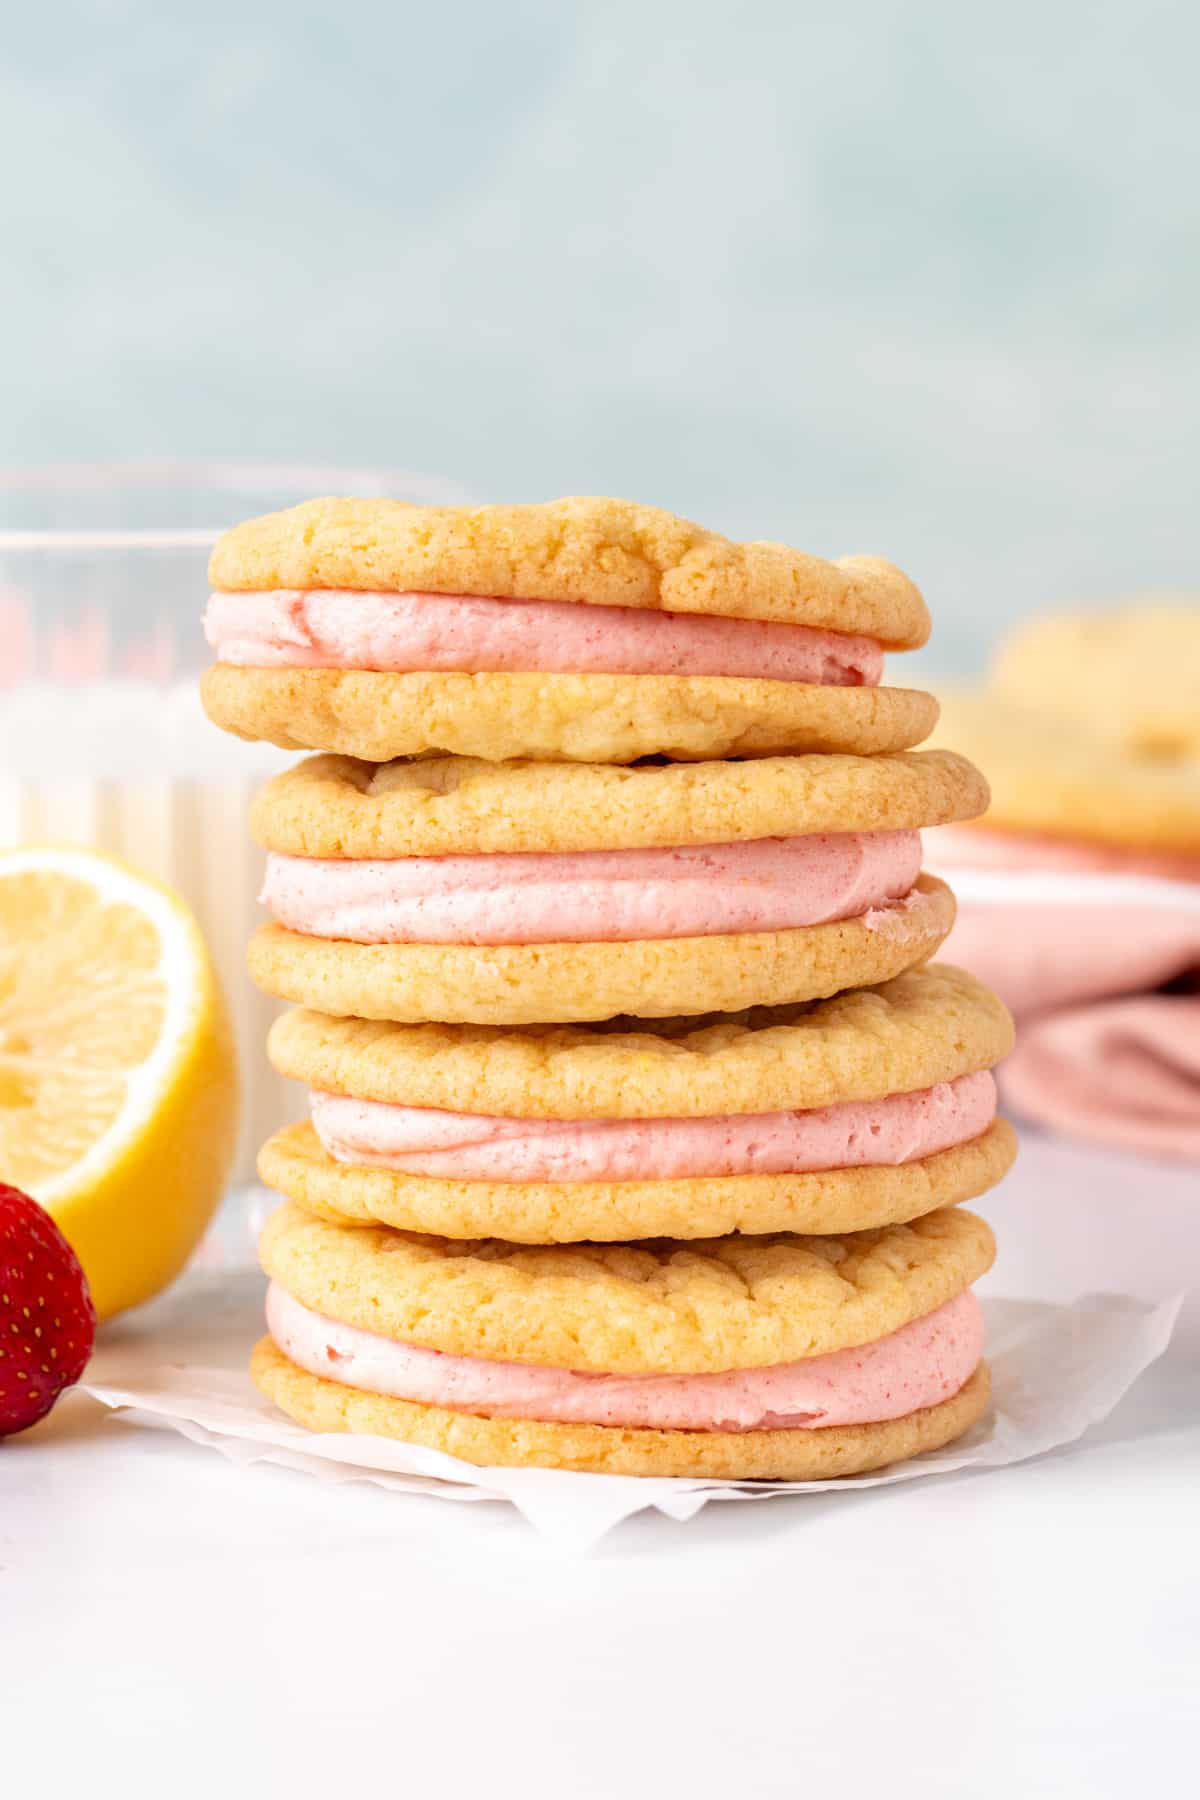 Stack of 4 lemon sandwich cookies with pink strawberry frosting